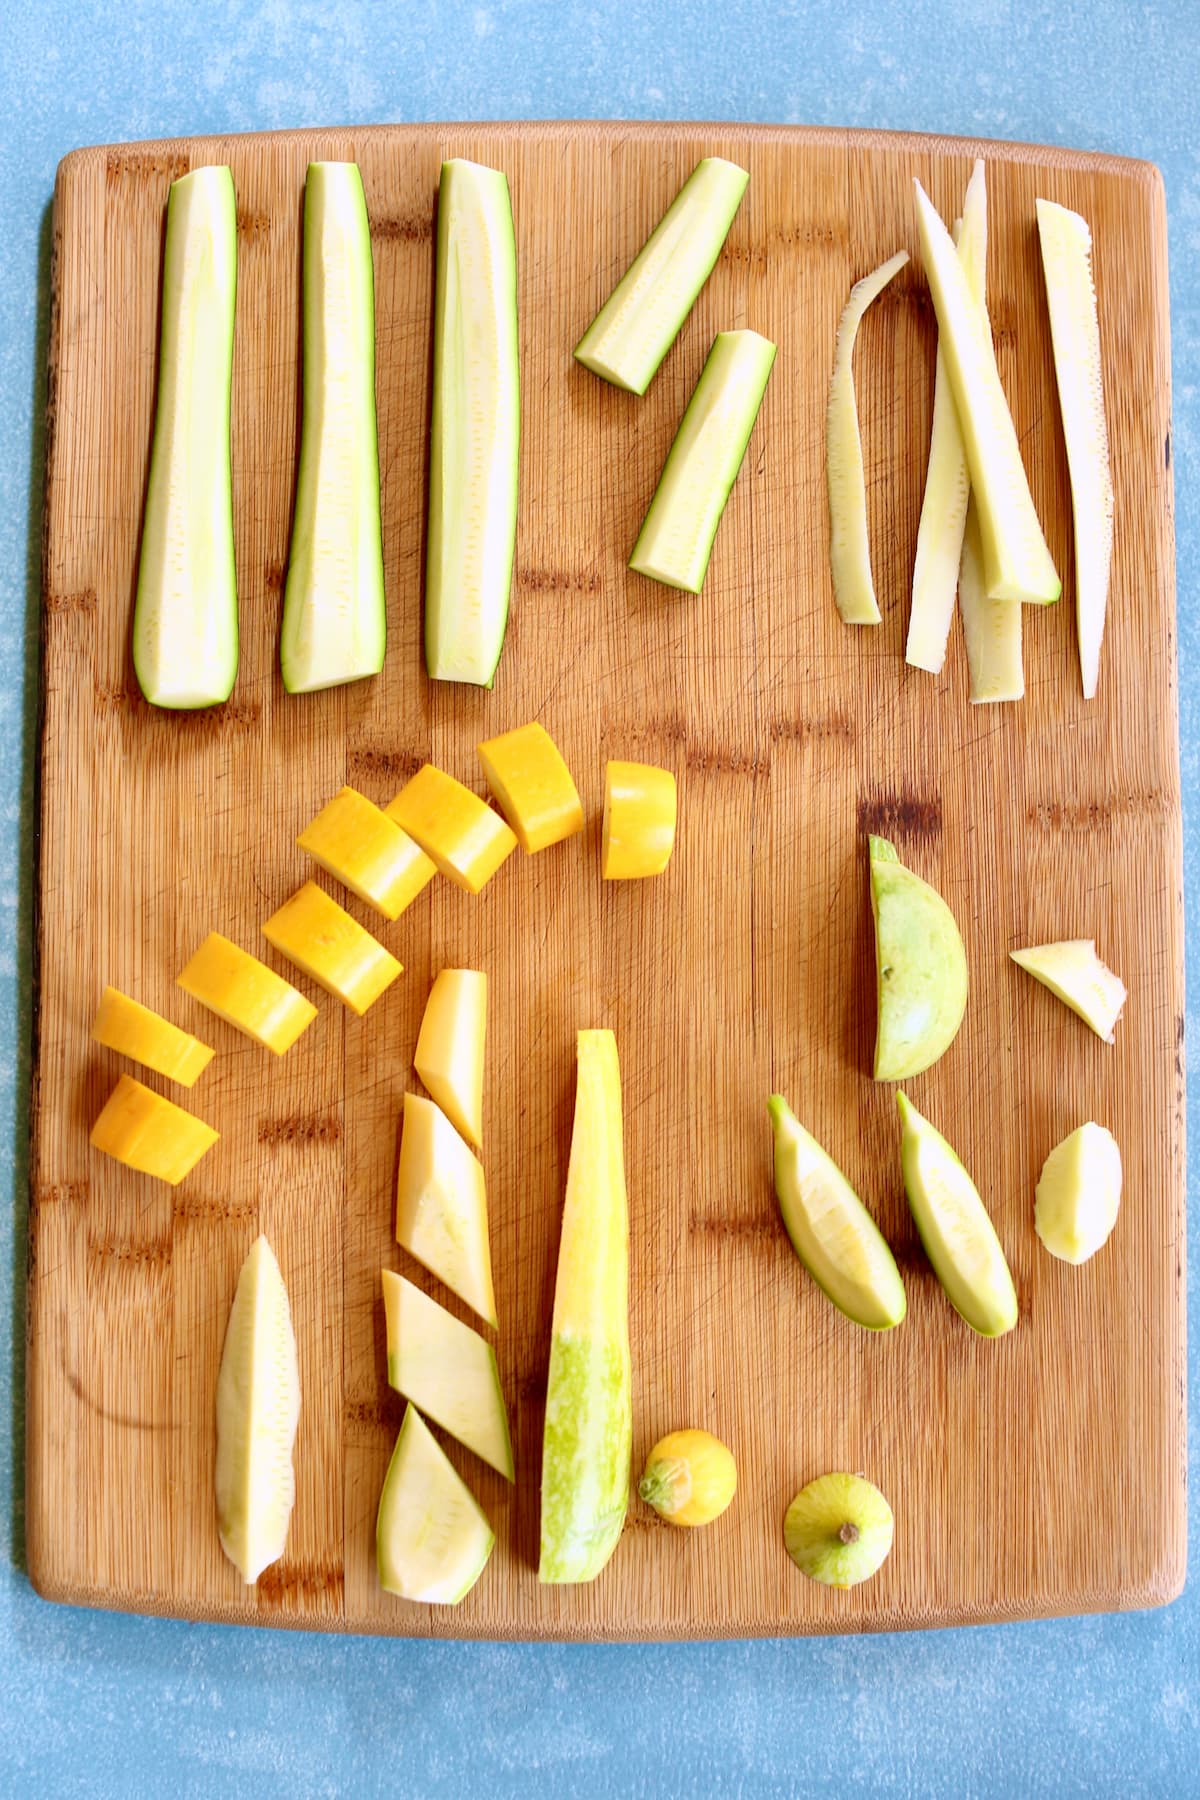 a wooden cutting board with different zucchini and squash and their knife cuts.